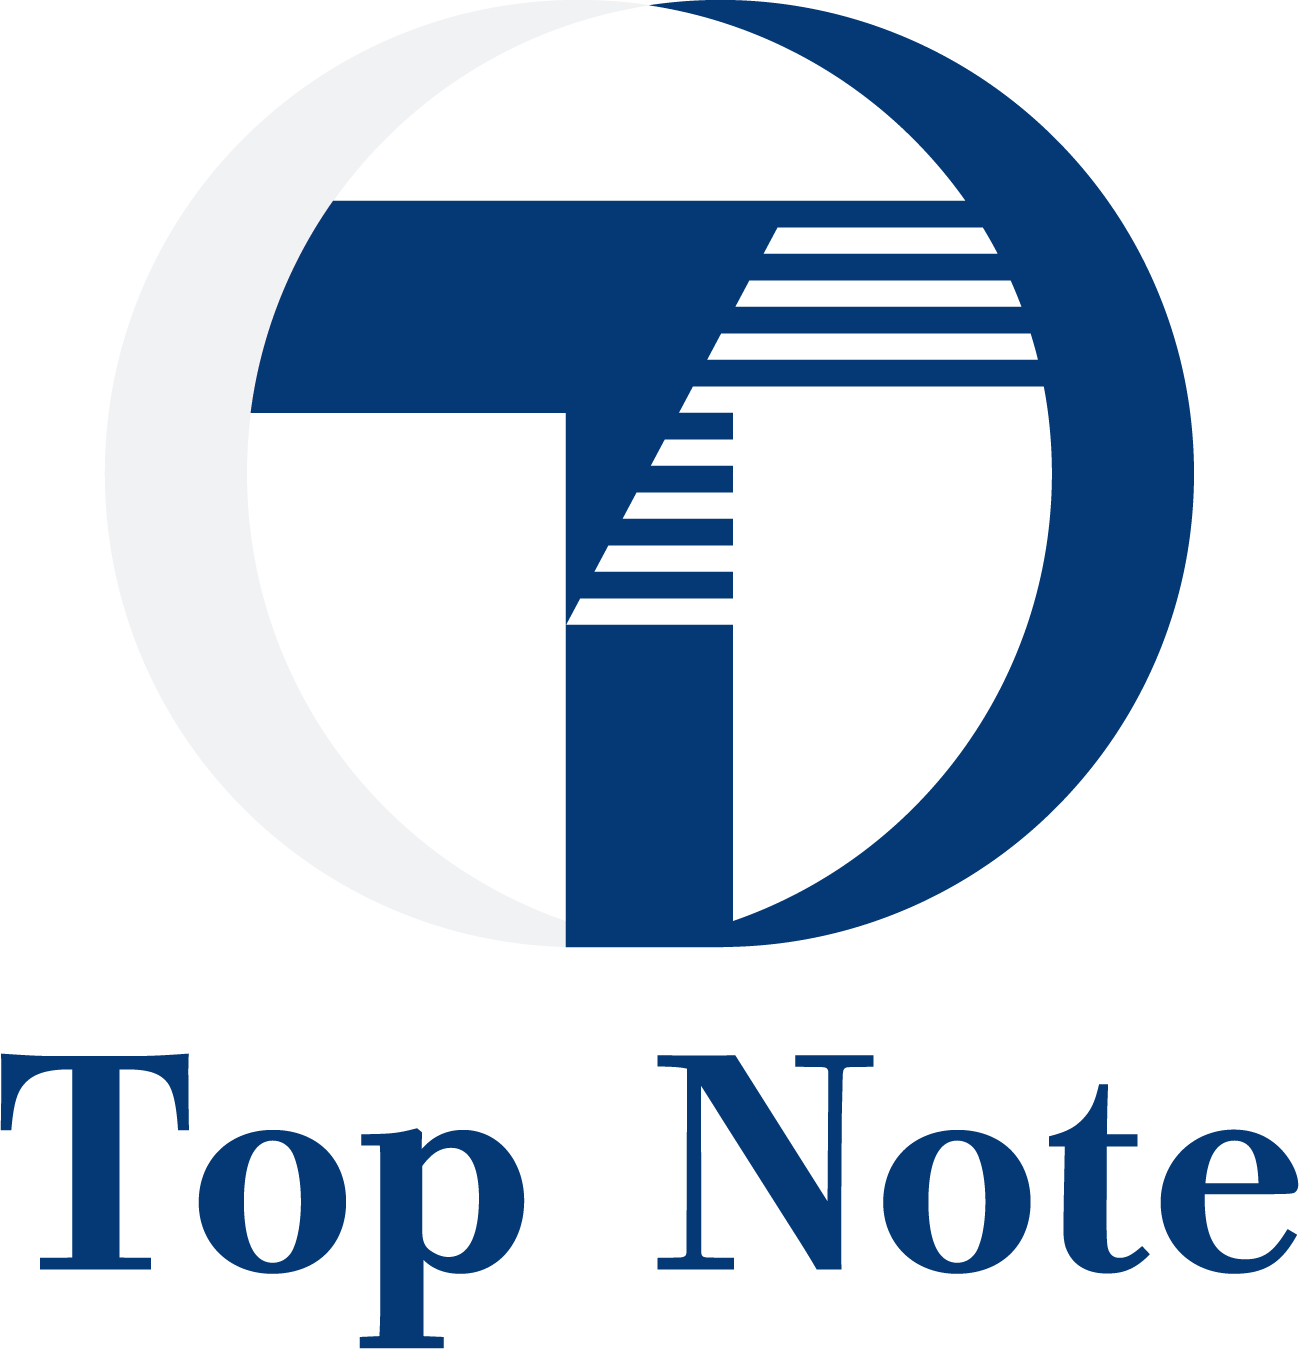 TopNote株式会社のロゴ